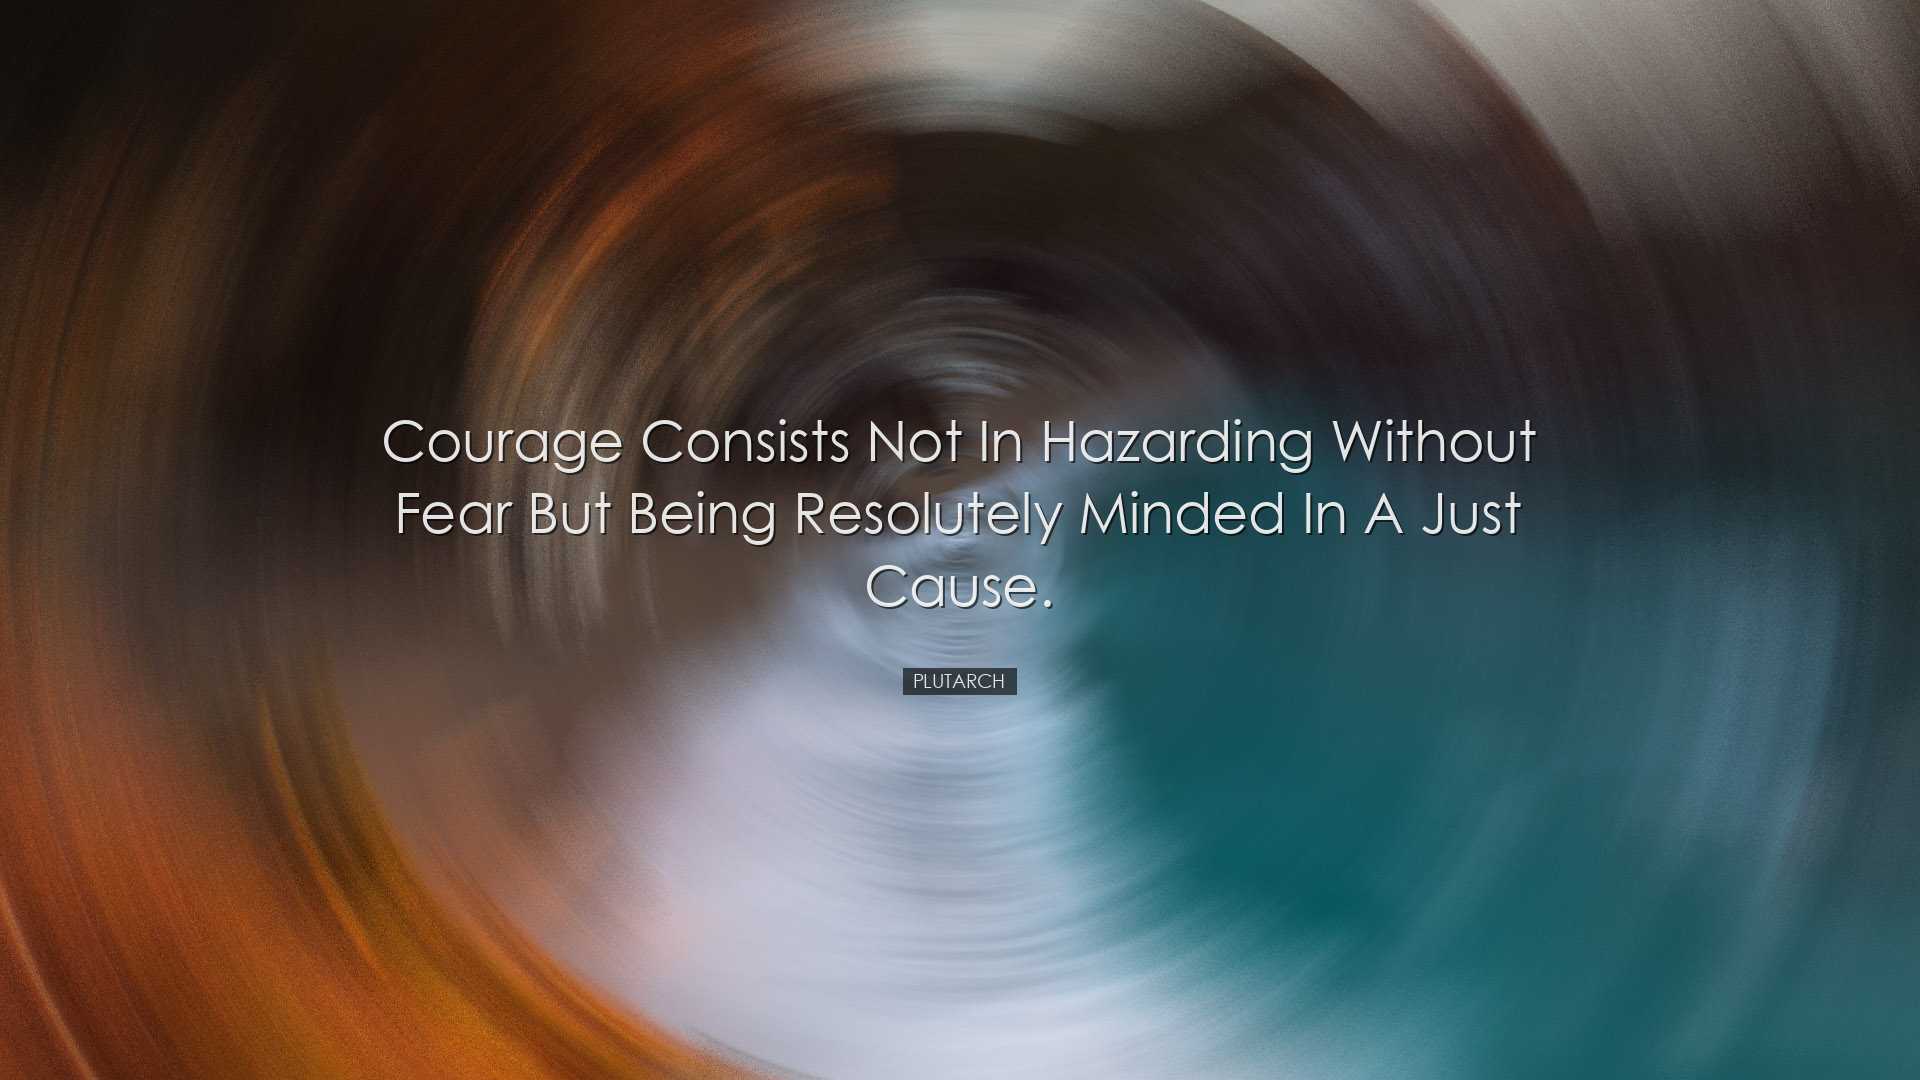 Courage consists not in hazarding without fear but being resolutel